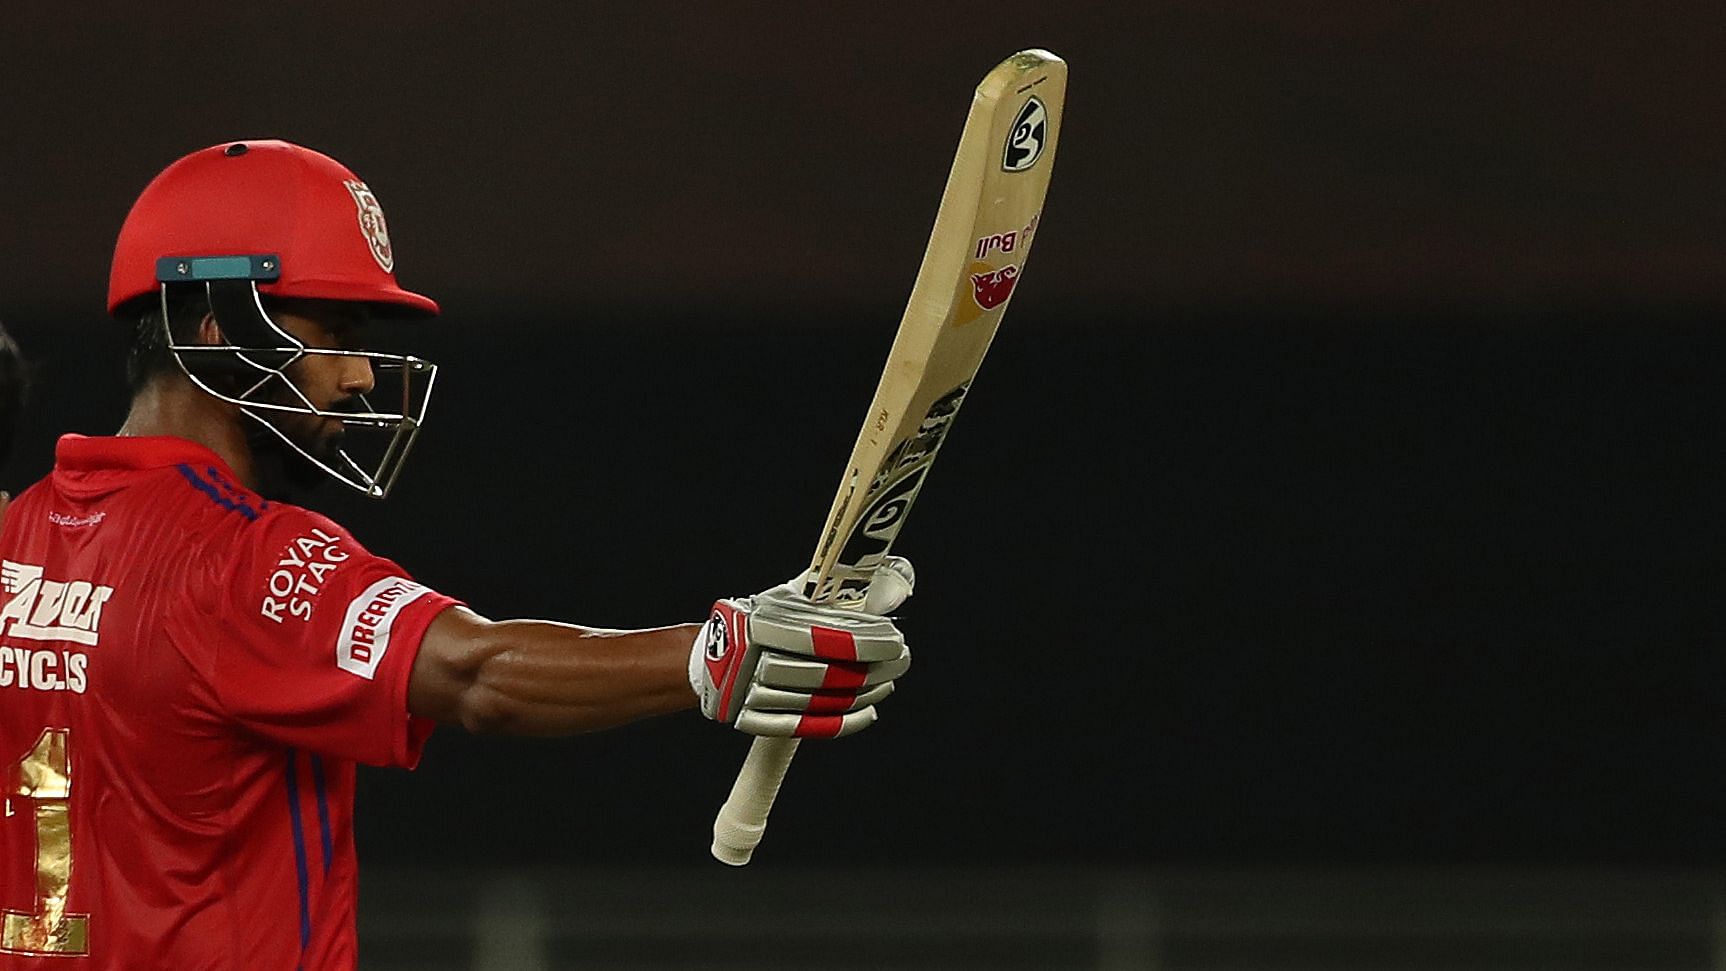 Kings XI Punjab captain KL Rahul smashed a few IPL records with a blistering 69-ball 132 – the highest individual score by an Indian player in the IPL.